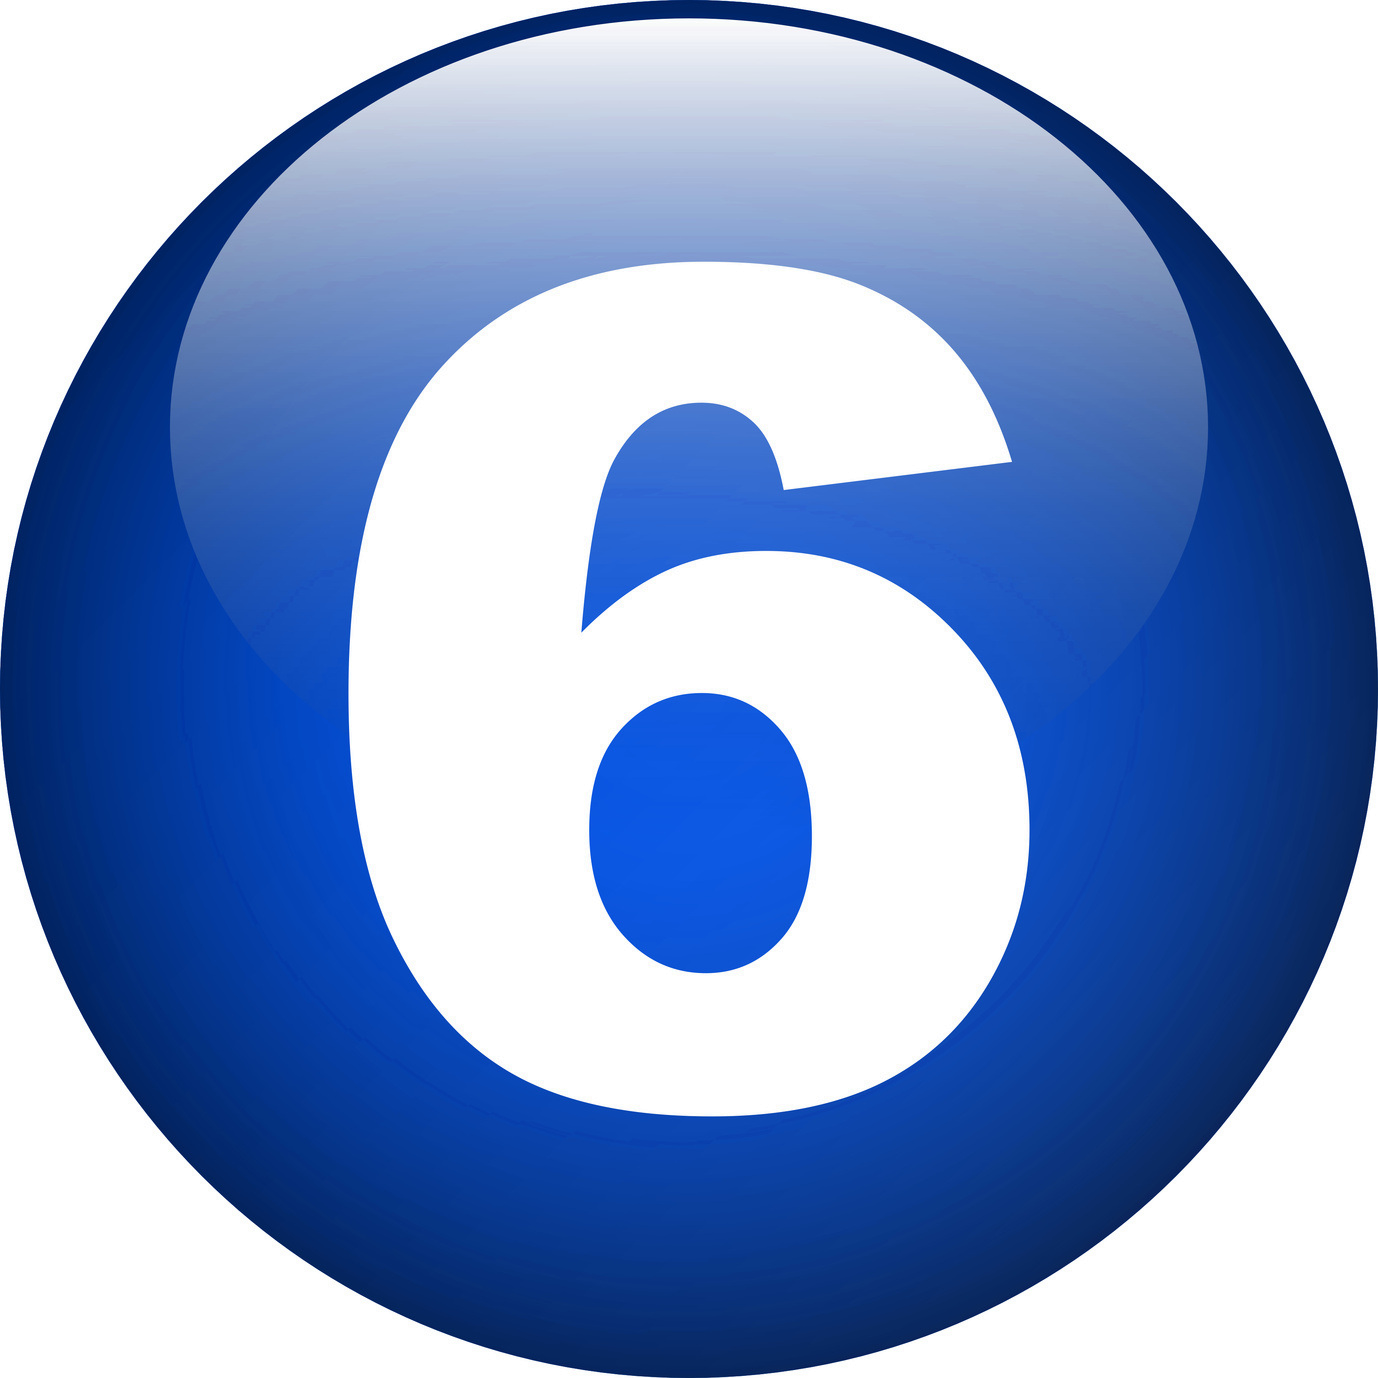 6 Number PNG Image HD